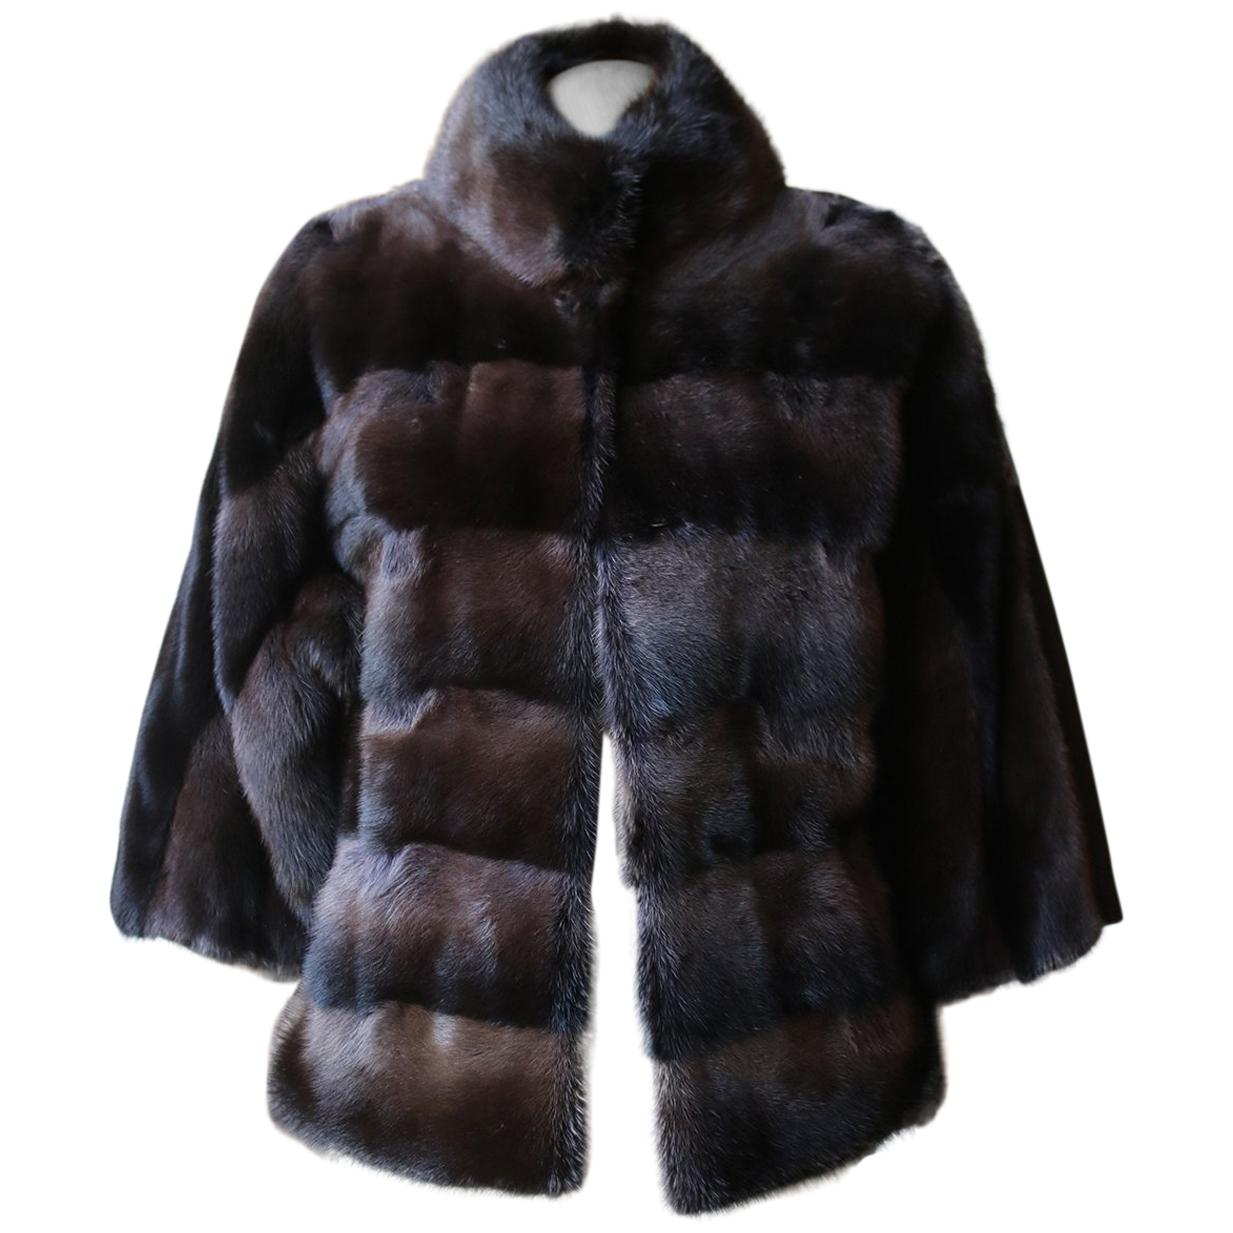 Vicedomini Mink Fur and Cashmere Jacket